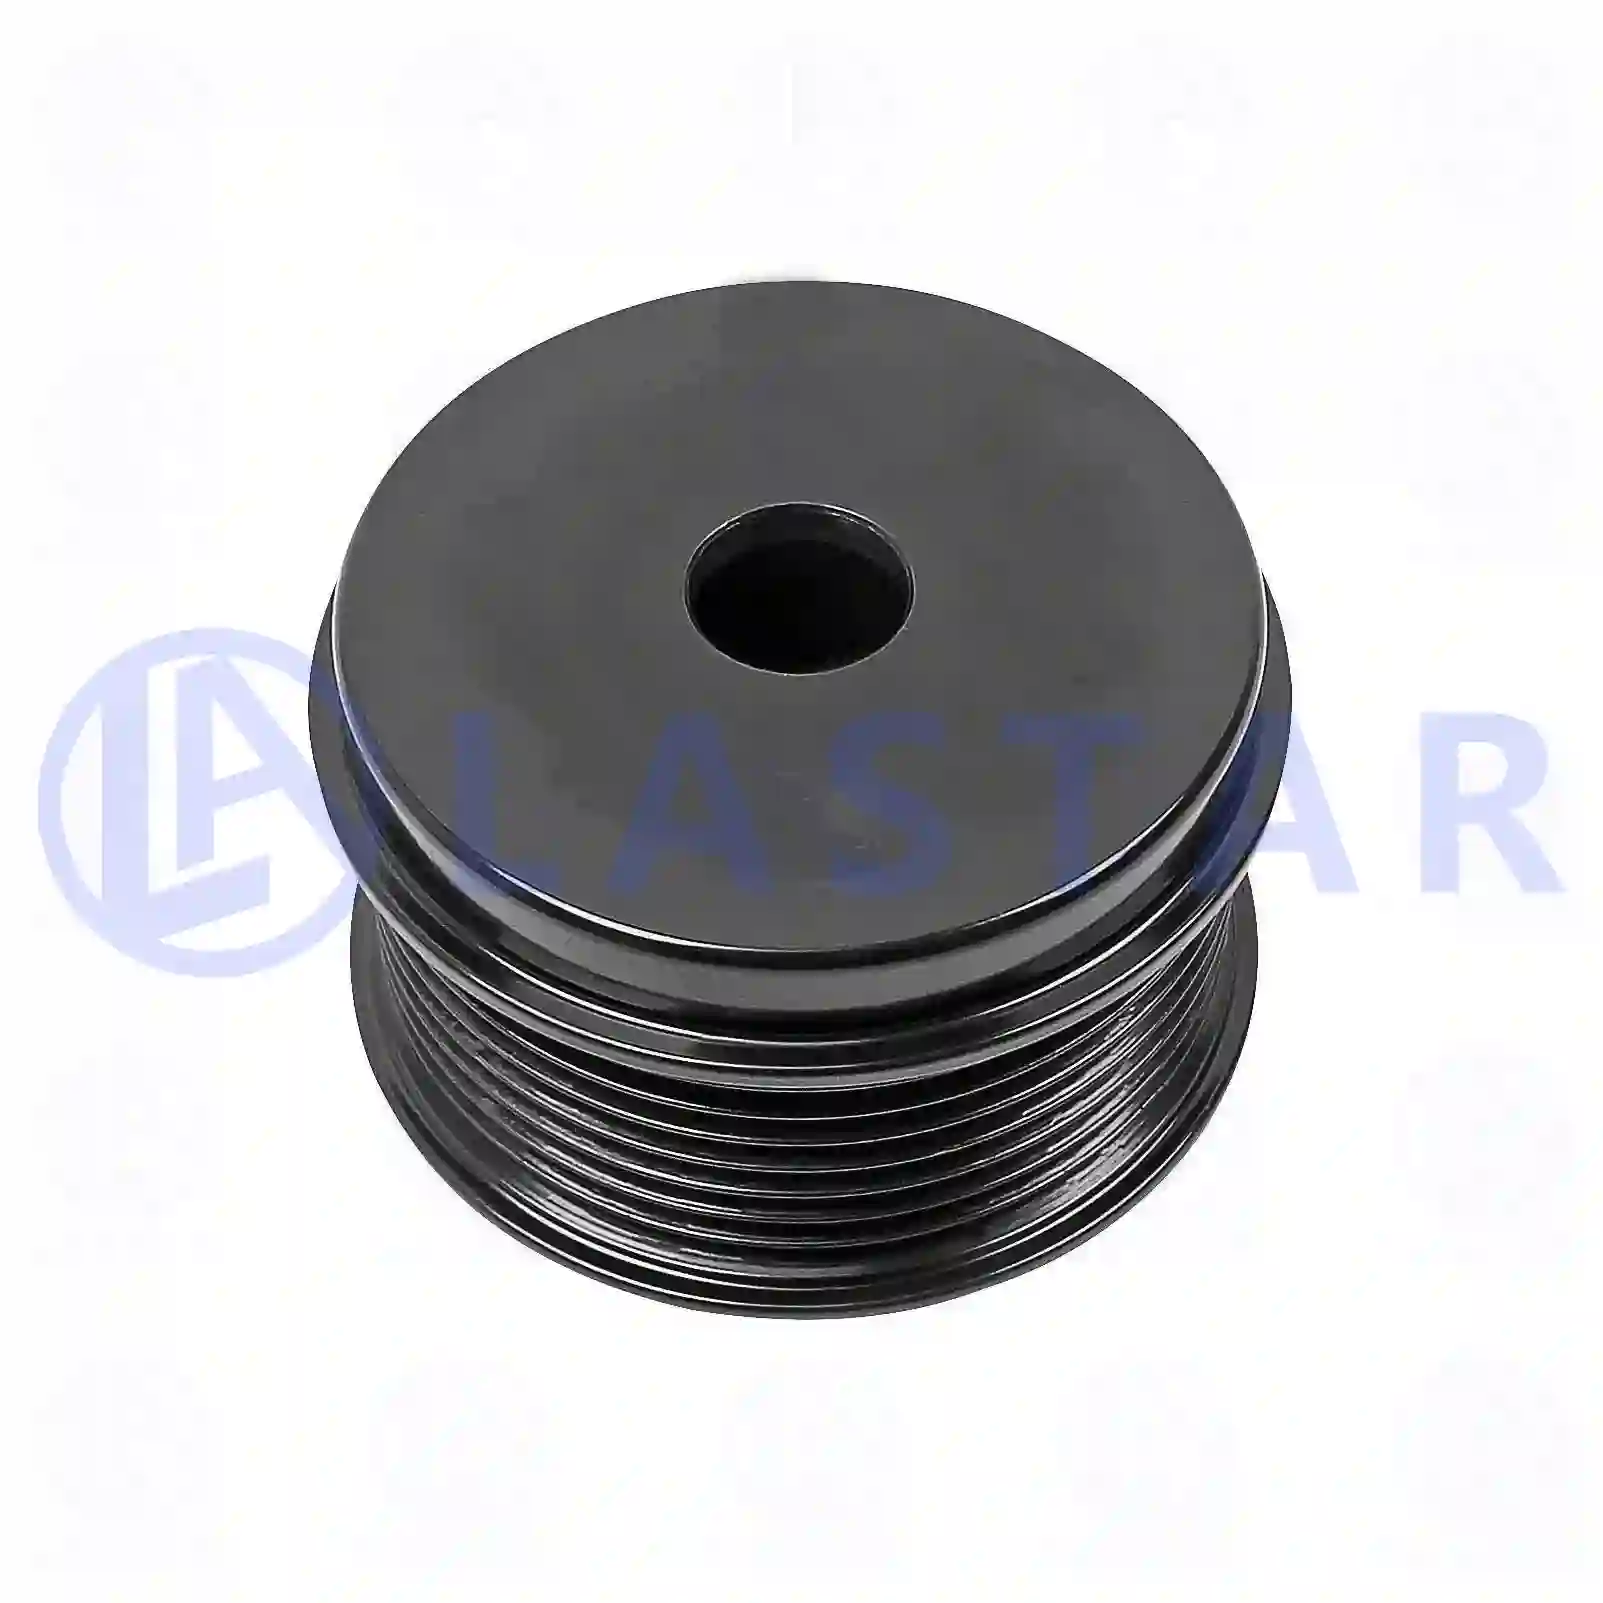 Pulley, 77710269, 7420523395, 20523395, 21454748, , ||  77710269 Lastar Spare Part | Truck Spare Parts, Auotomotive Spare Parts Pulley, 77710269, 7420523395, 20523395, 21454748, , ||  77710269 Lastar Spare Part | Truck Spare Parts, Auotomotive Spare Parts